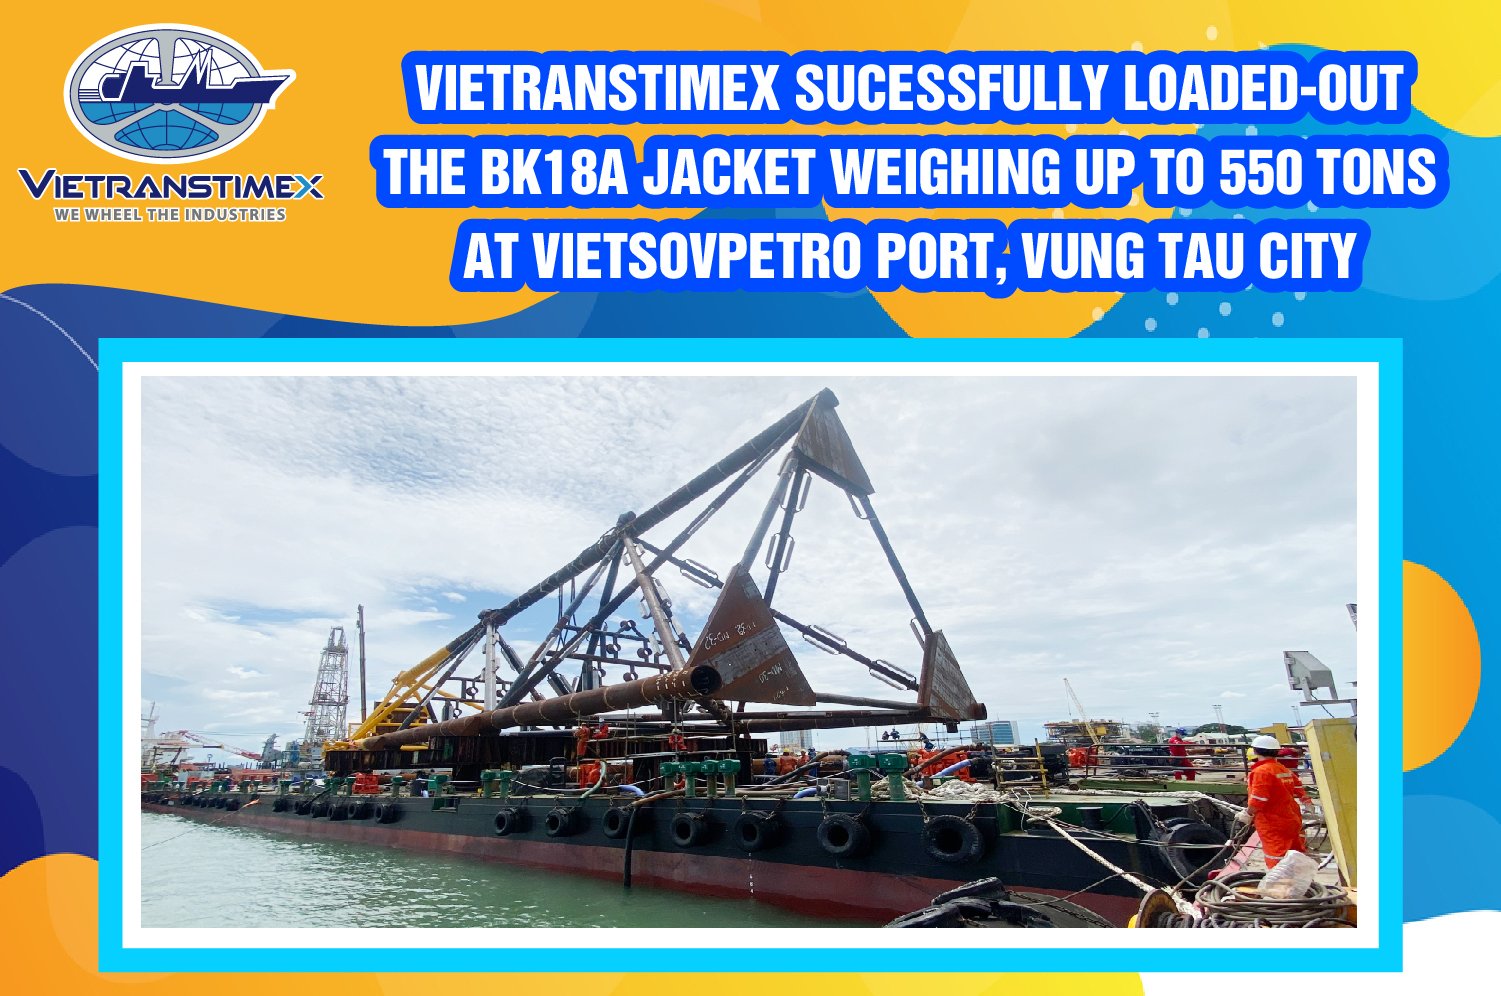 Loaded-Out The BK18A Jacket Weighing Up To 550 Tons At Vietsovpetro Port, Vung Tau City (July 2021)